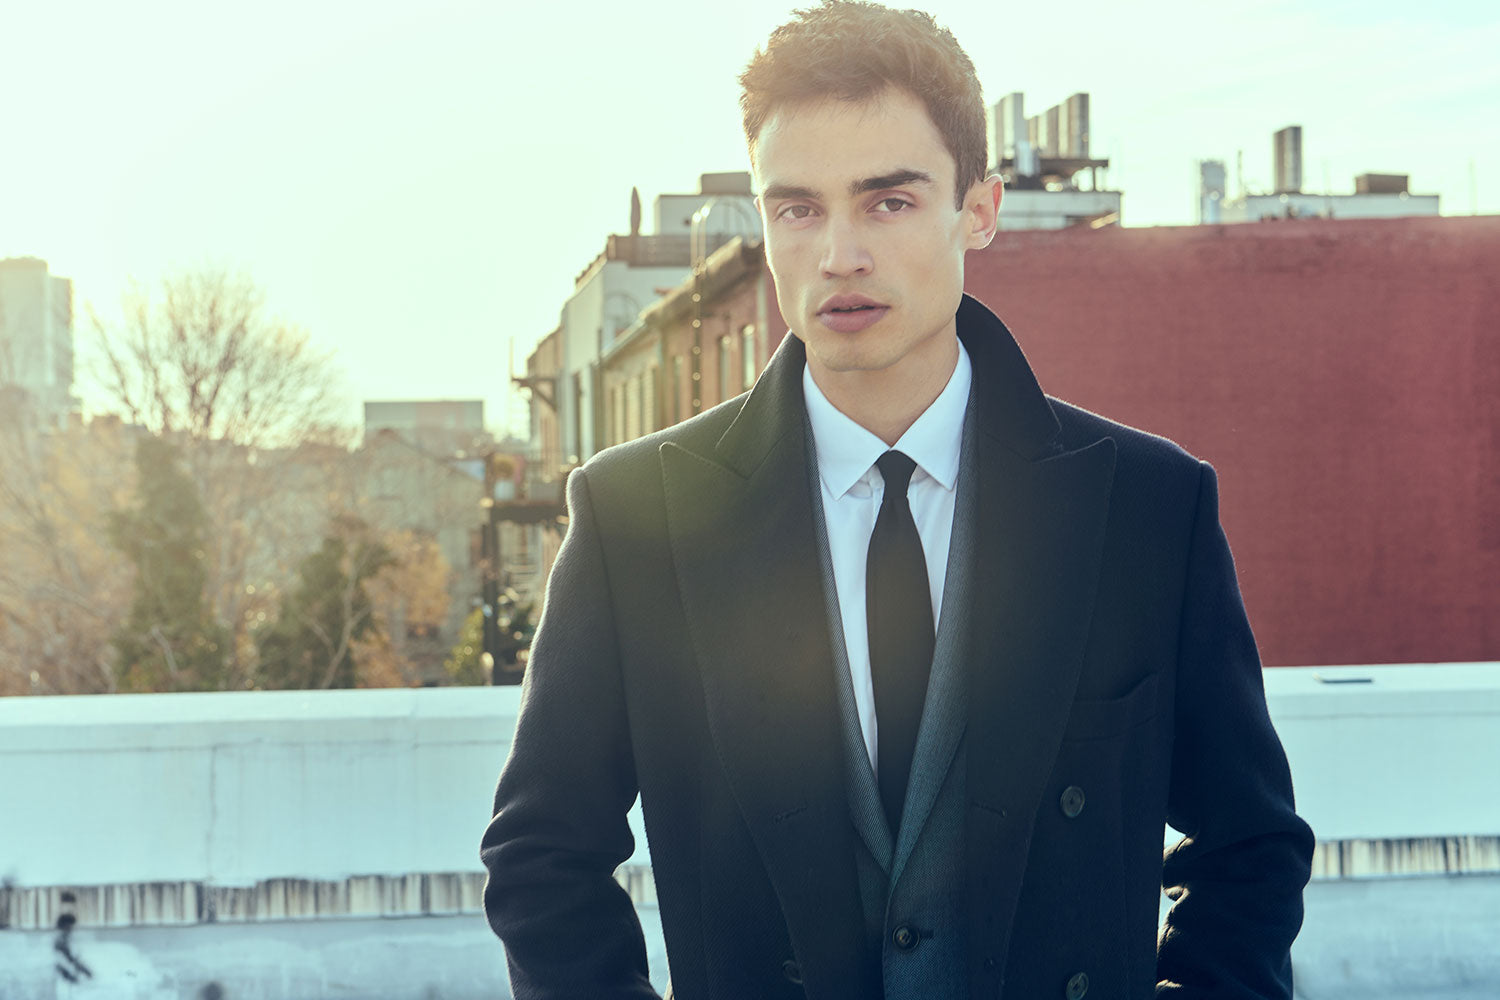 Model wears a charcoal suit jacket, white dress shirt, black tie, and black wool overcoat. He is standing on a NYC rooftop.